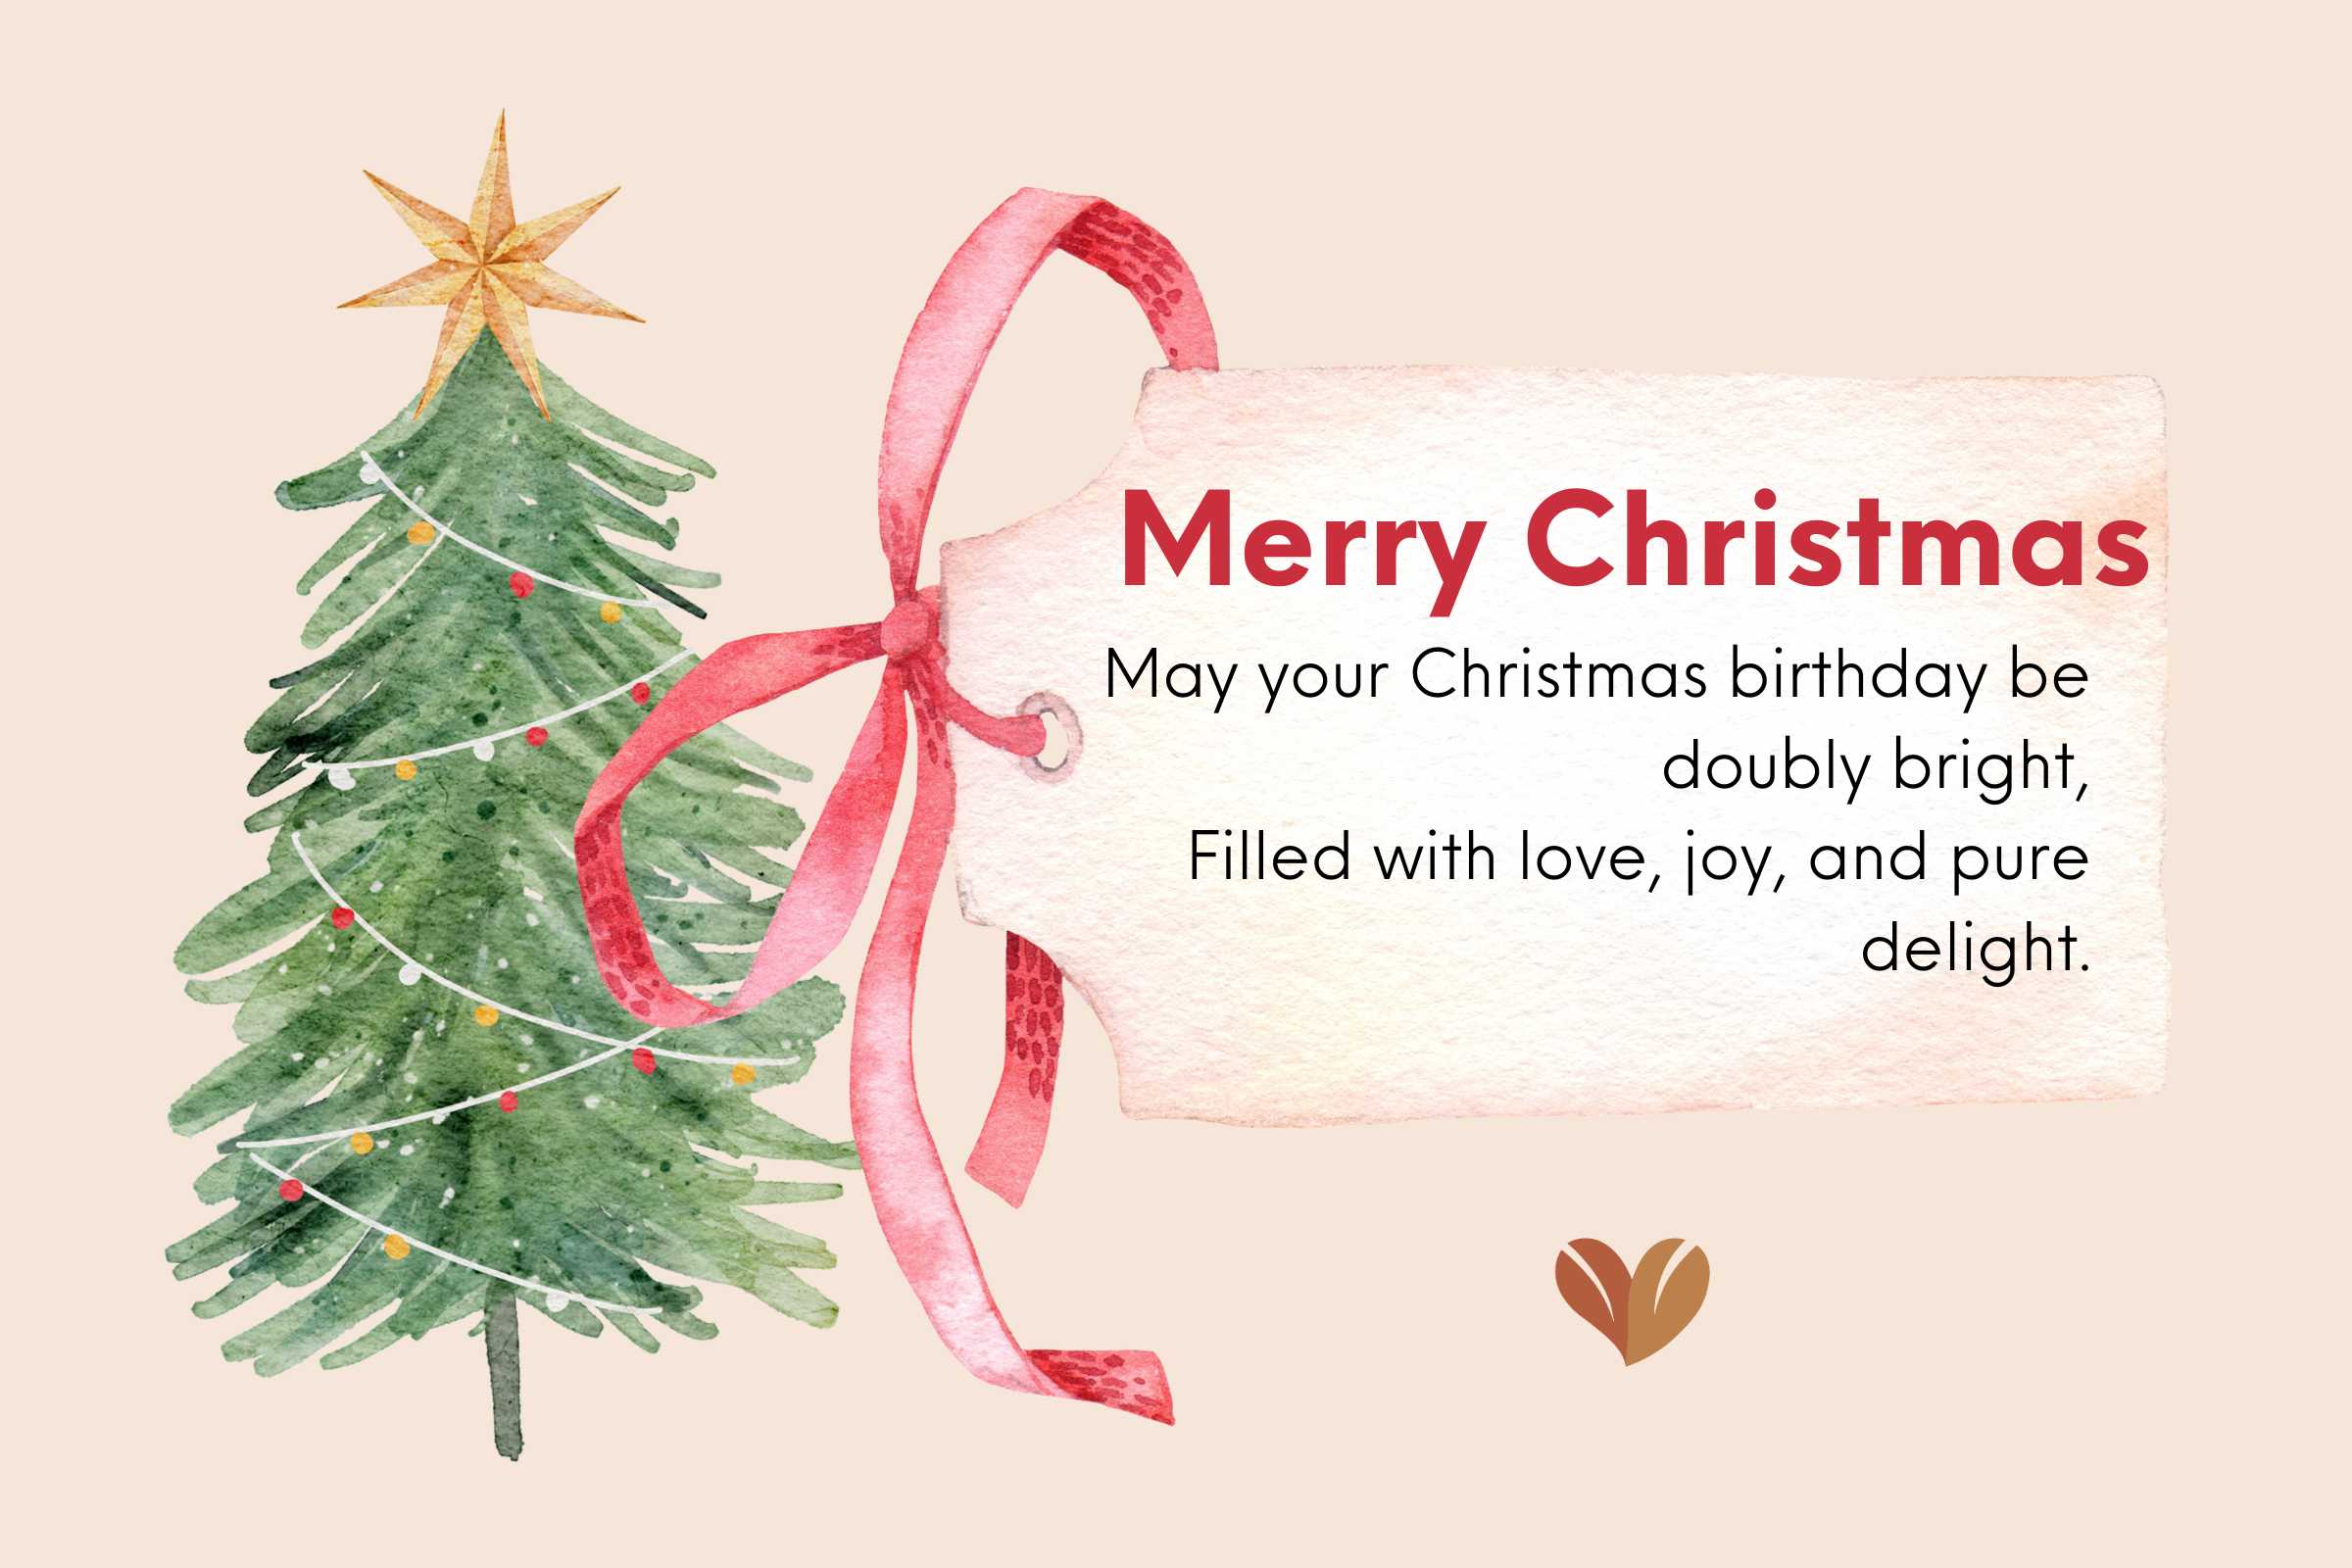 Christmas card verses filled with love, joy, and pure delight.